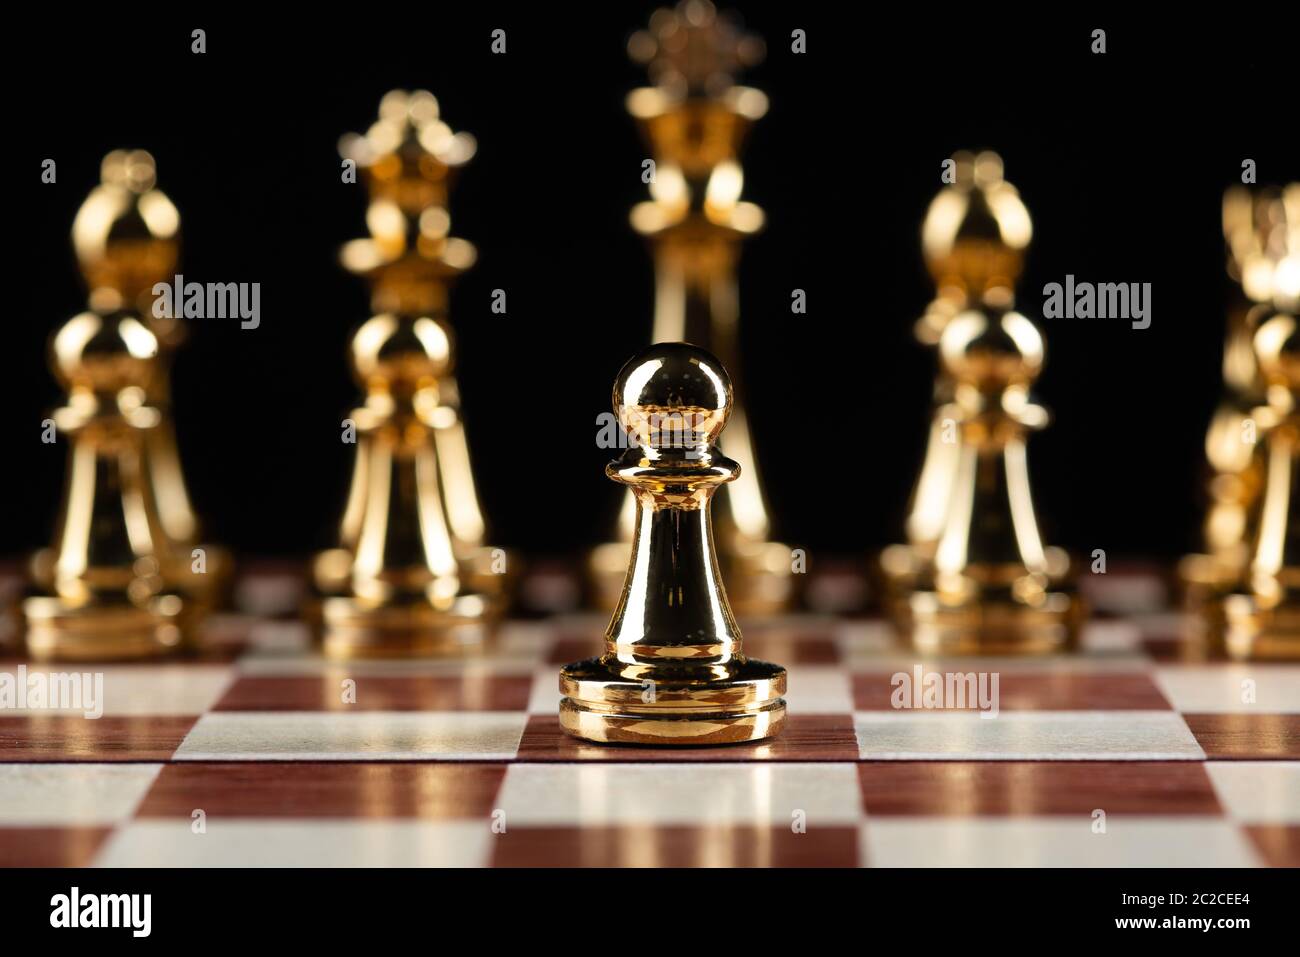 Golden chess figures standing on chessboard Stock Photo - Alamy